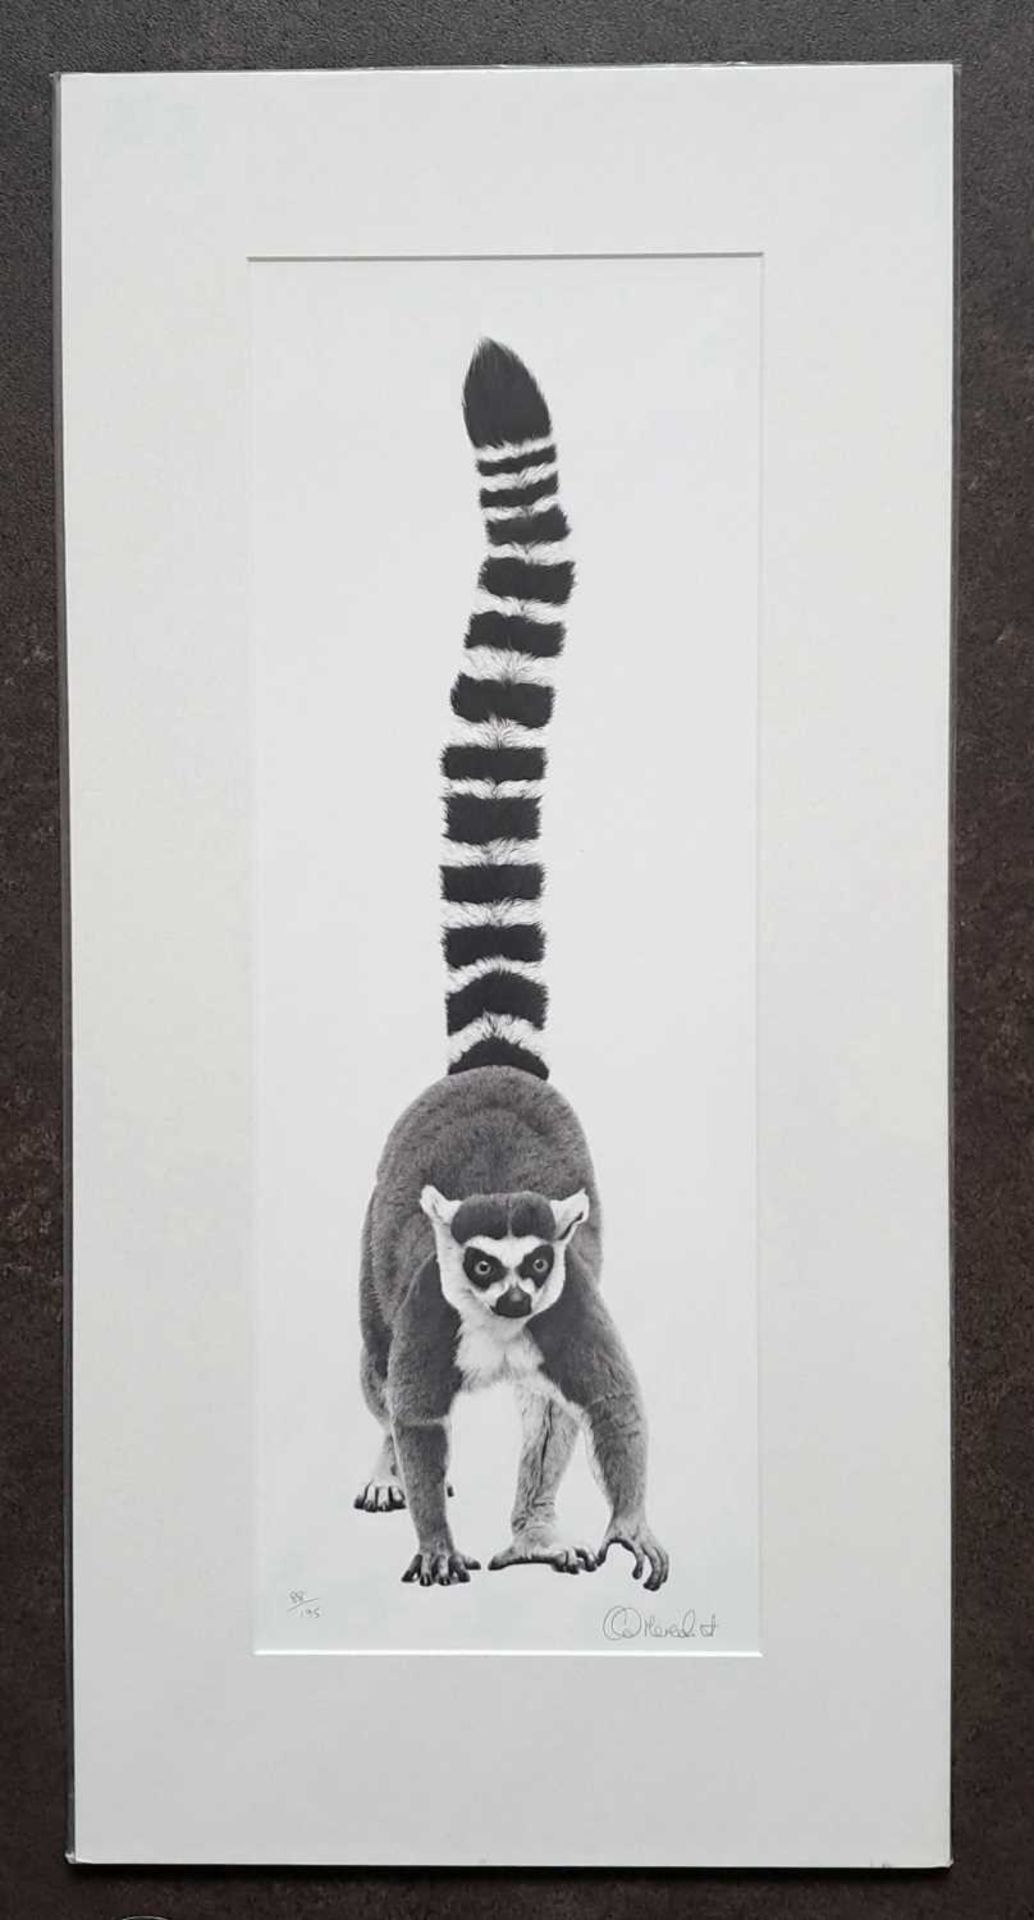 CLIVE MEREDITH - RING-TAILED LEMUR, LIMITED EDITION 88/195. 730 x 360 mm.